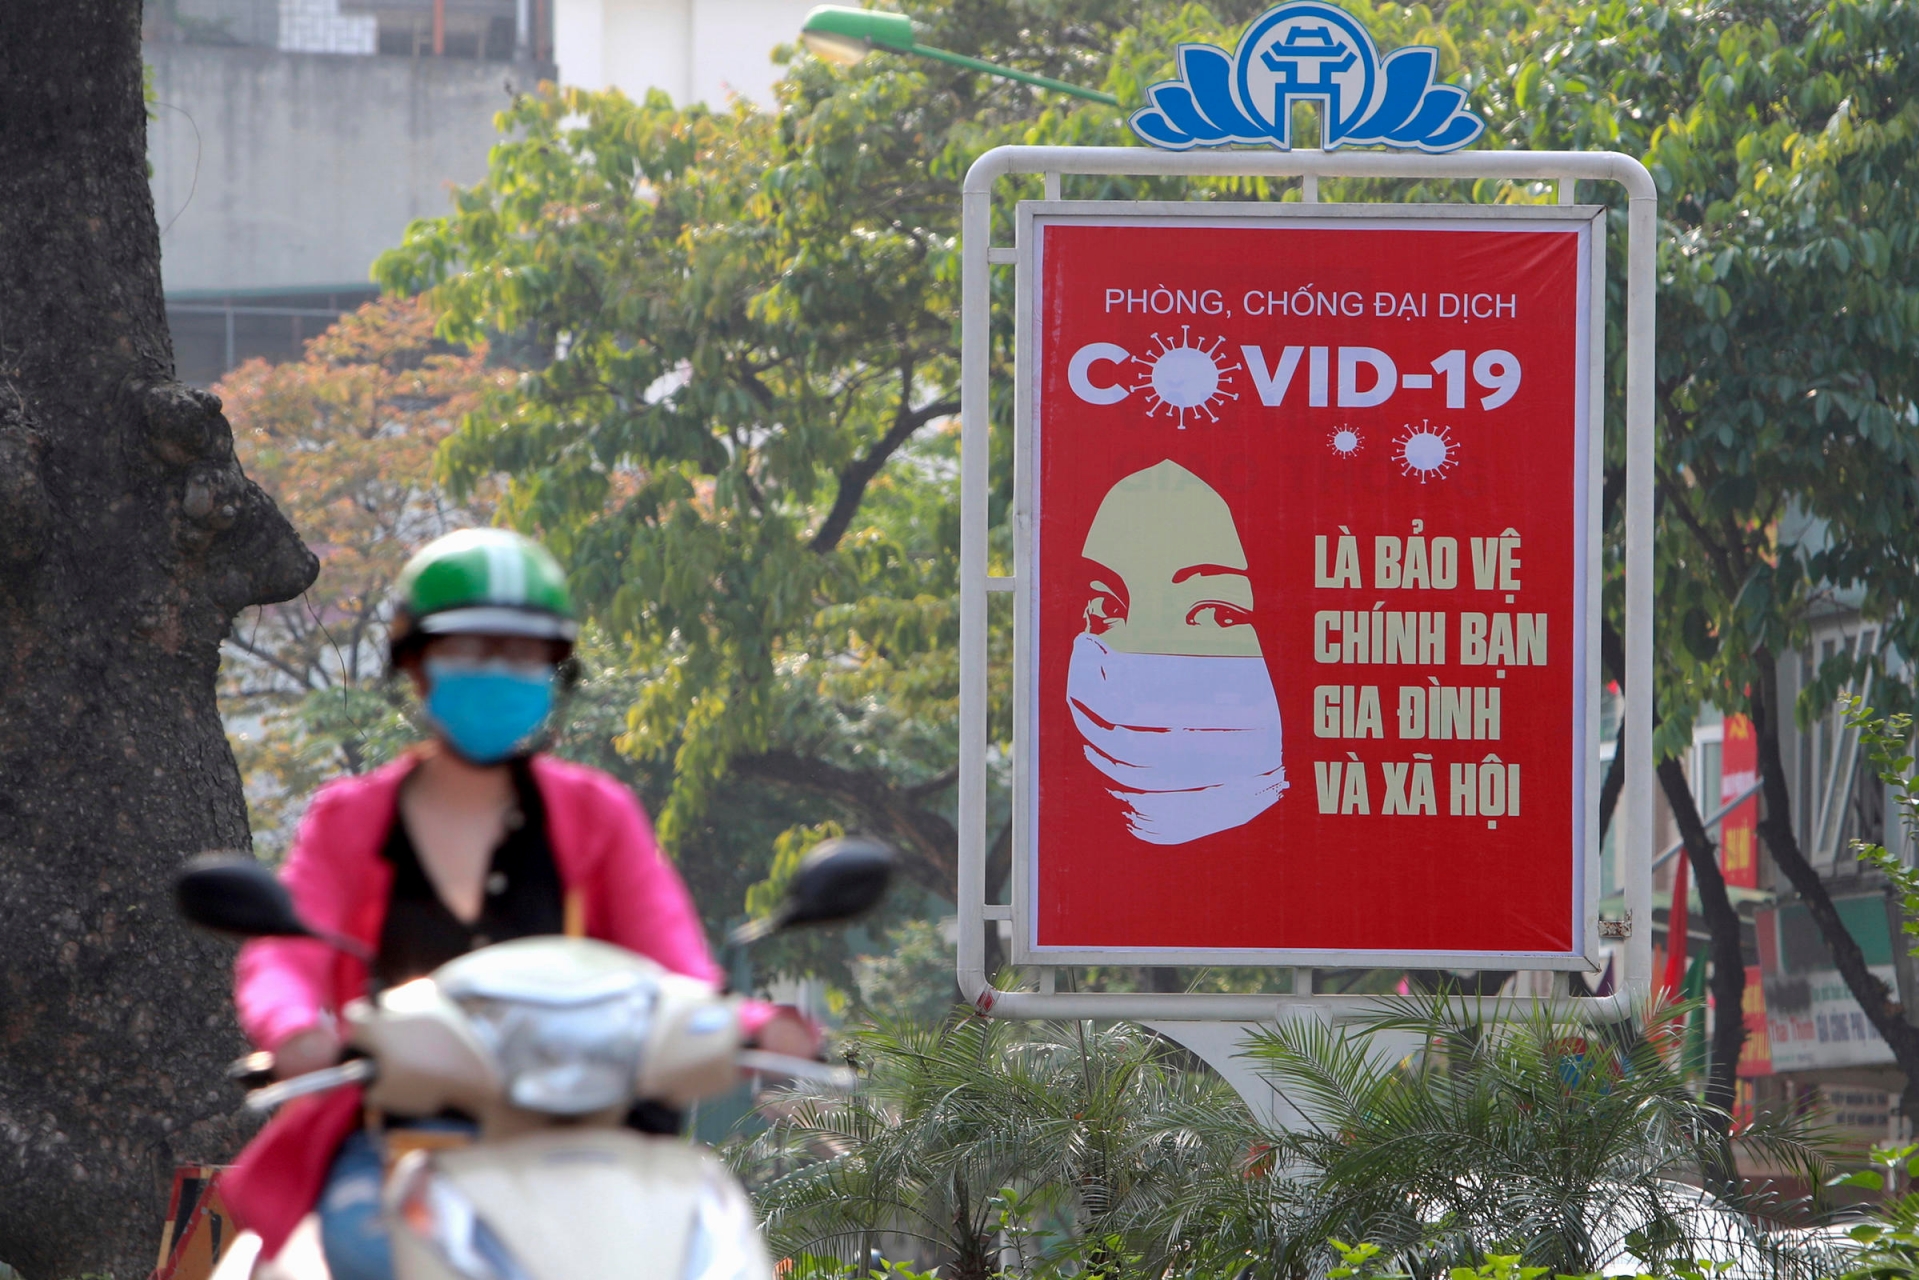 vietnam news today religious sites allowed to resume after covid 19